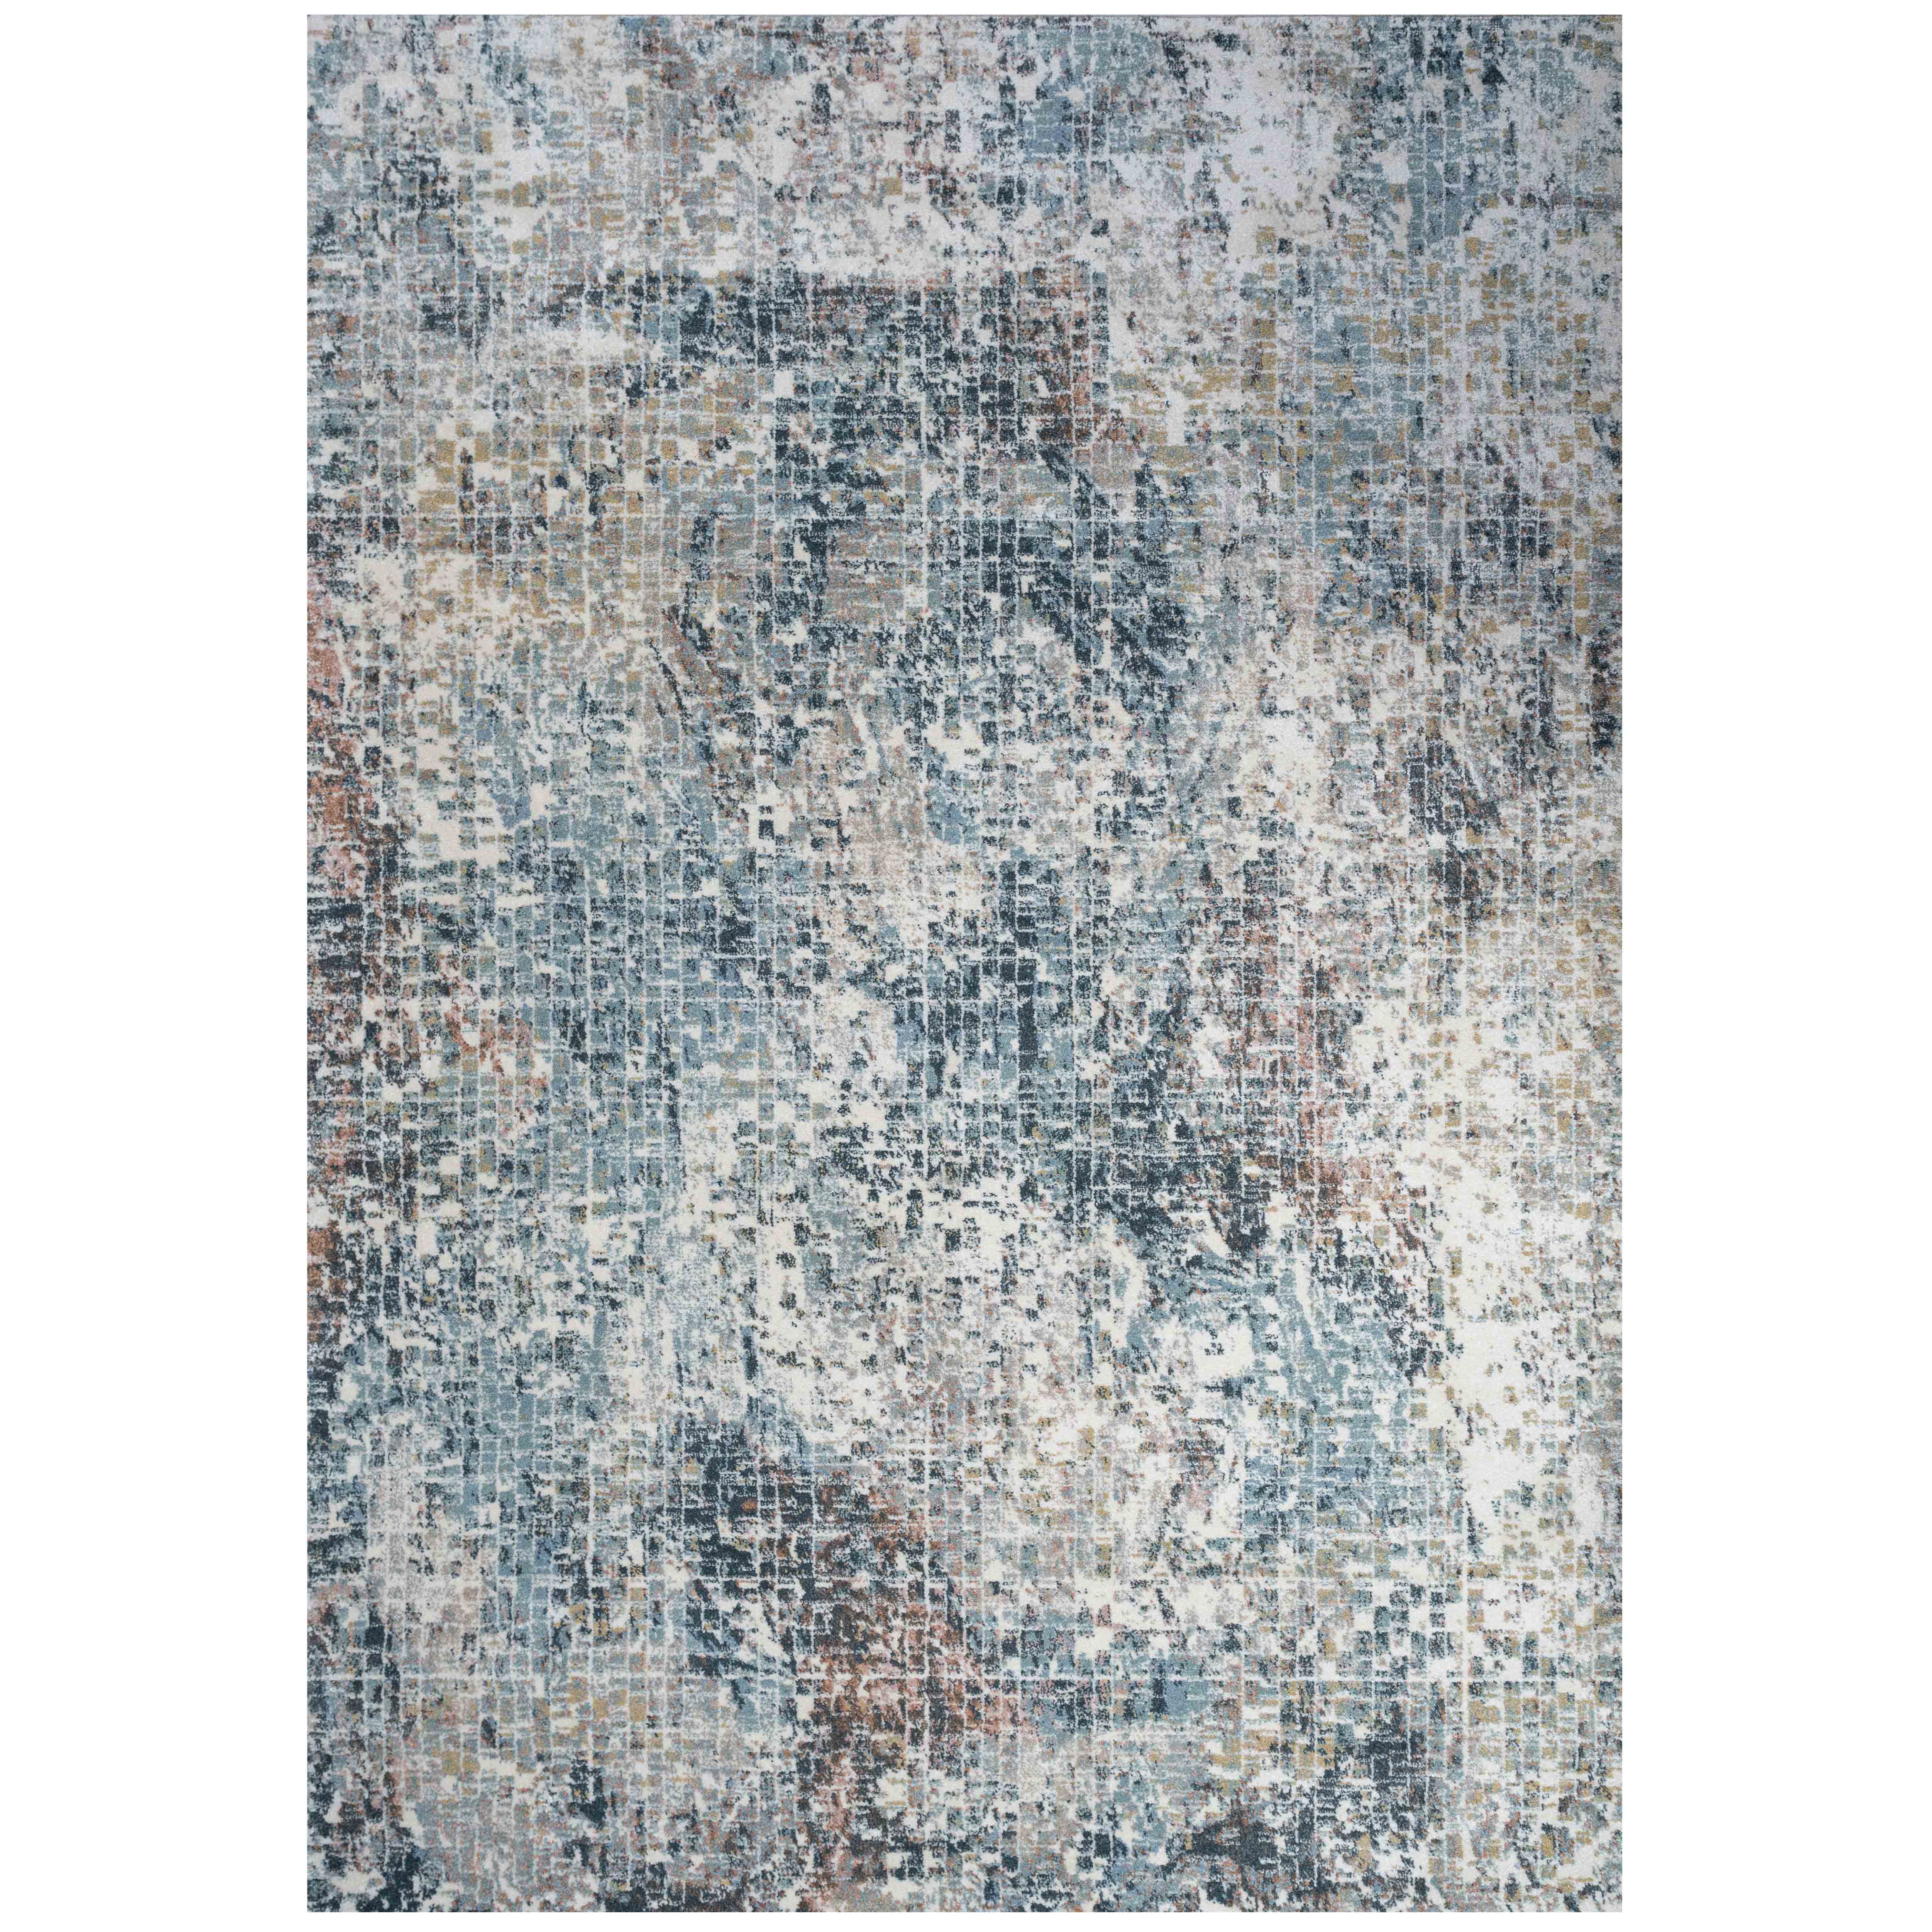 Soft Modern Blue Distressed Abstract Bedroom Rugs - Minuet |Living Room  Rugs | Kukoon Rugs Online